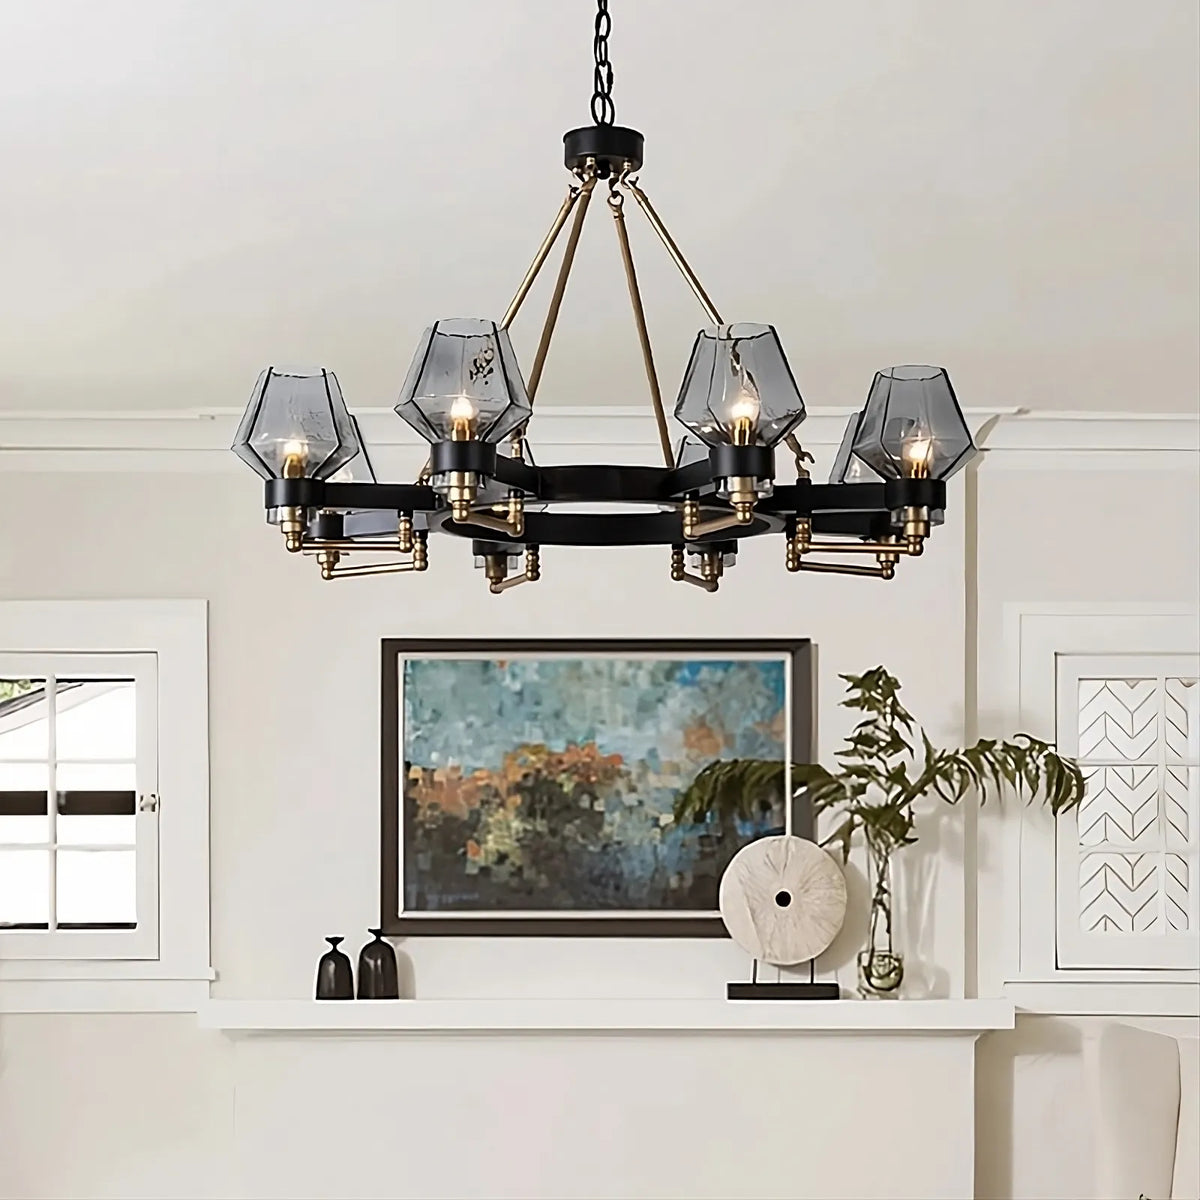 A modern living room features a timeless lighting option with a black and gold Morsale.com Retro American Pendant Chandelier Light Fixture, boasting six geometric glass light shades suspended from the ceiling. Below, there's an abstract painting, potted plant, decorative sculptures, and a window with white trim. The room's decor is contemporary.